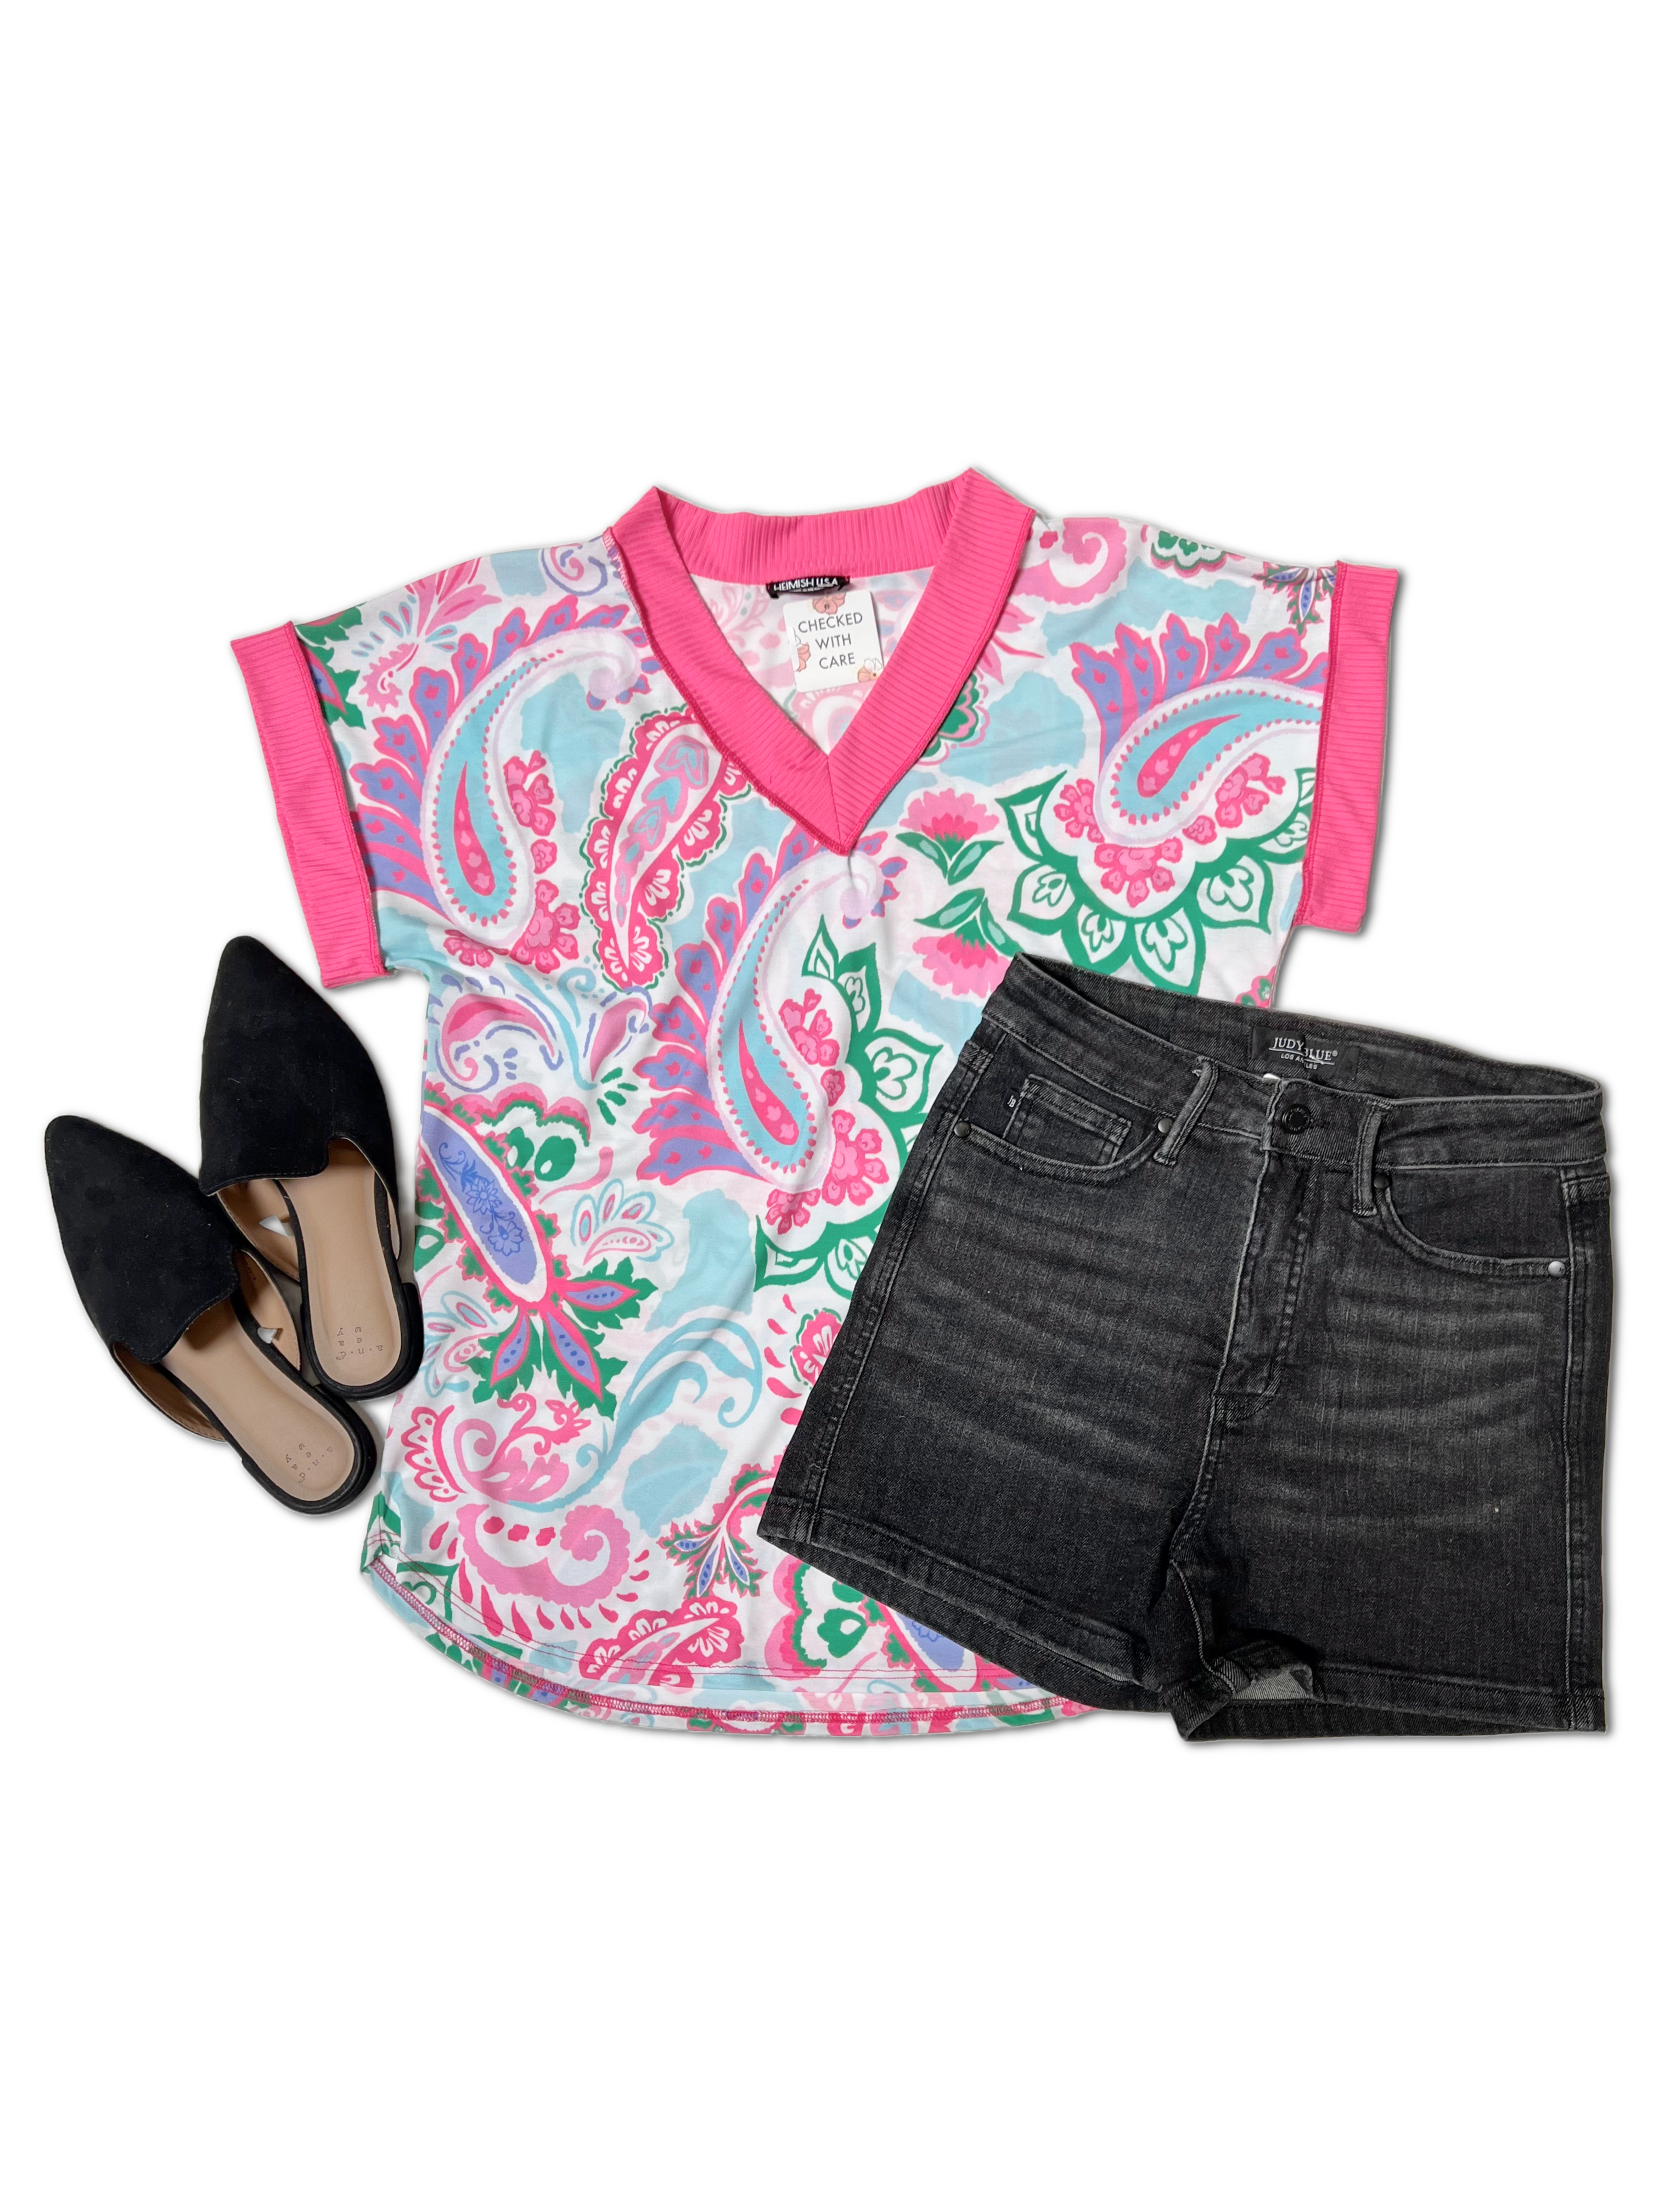 A brightly patterned Electric Paisley - Short Sleeve shirt by Heimish with pink trim is laid out on a white background. Next to it, there are black denim shorts and a pair of black, pointed-toe slide shoes. The short sleeve shirt features a mix of pink, teal, and white paisley designs.